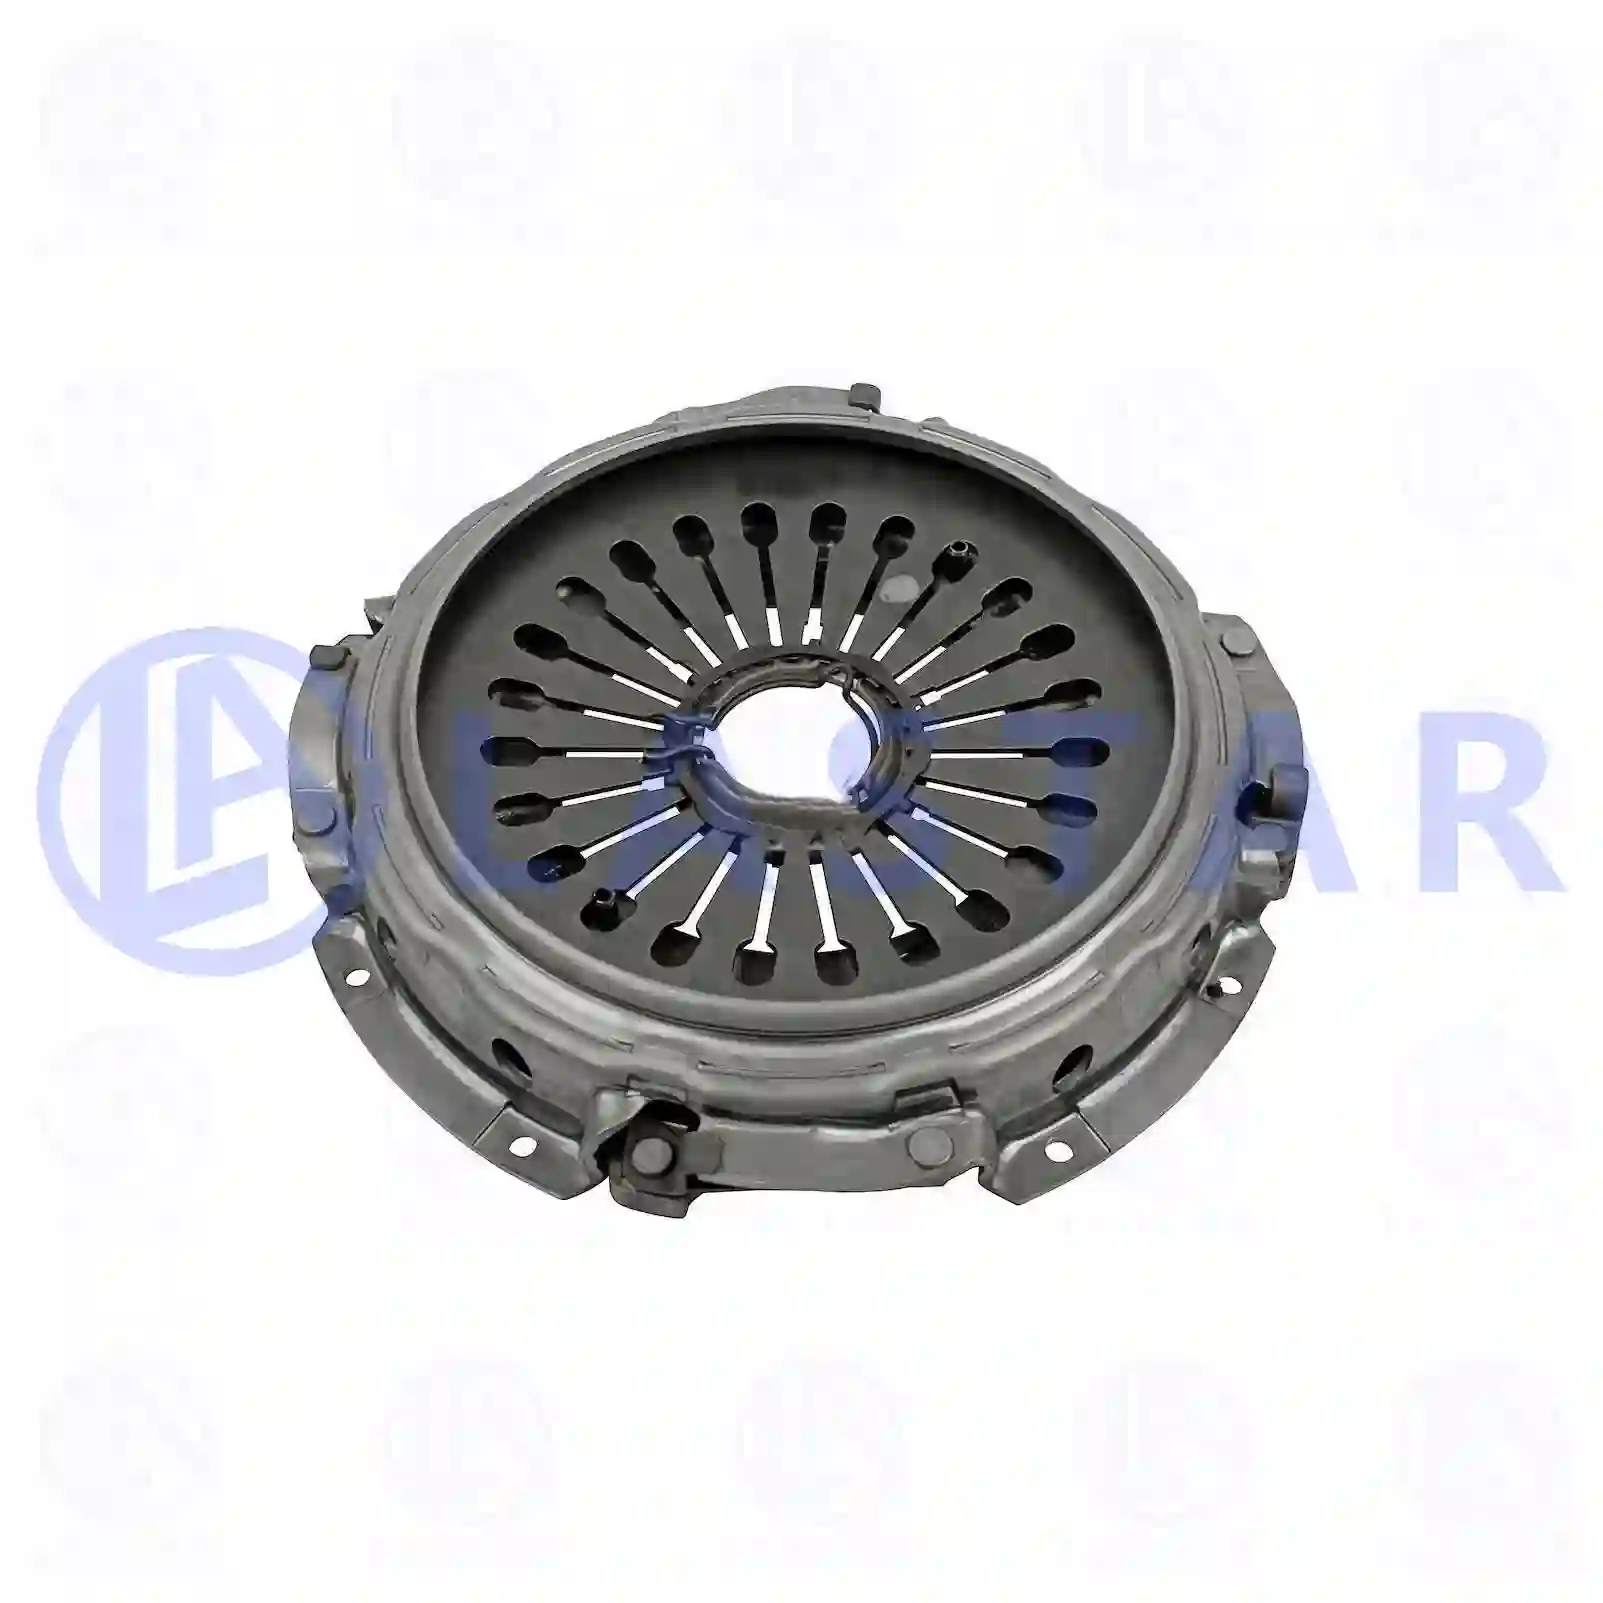 Clutch cover, 77722449, 0032509404, 0042500080, 0042505104, 004250510480, 0052503904 ||  77722449 Lastar Spare Part | Truck Spare Parts, Auotomotive Spare Parts Clutch cover, 77722449, 0032509404, 0042500080, 0042505104, 004250510480, 0052503904 ||  77722449 Lastar Spare Part | Truck Spare Parts, Auotomotive Spare Parts